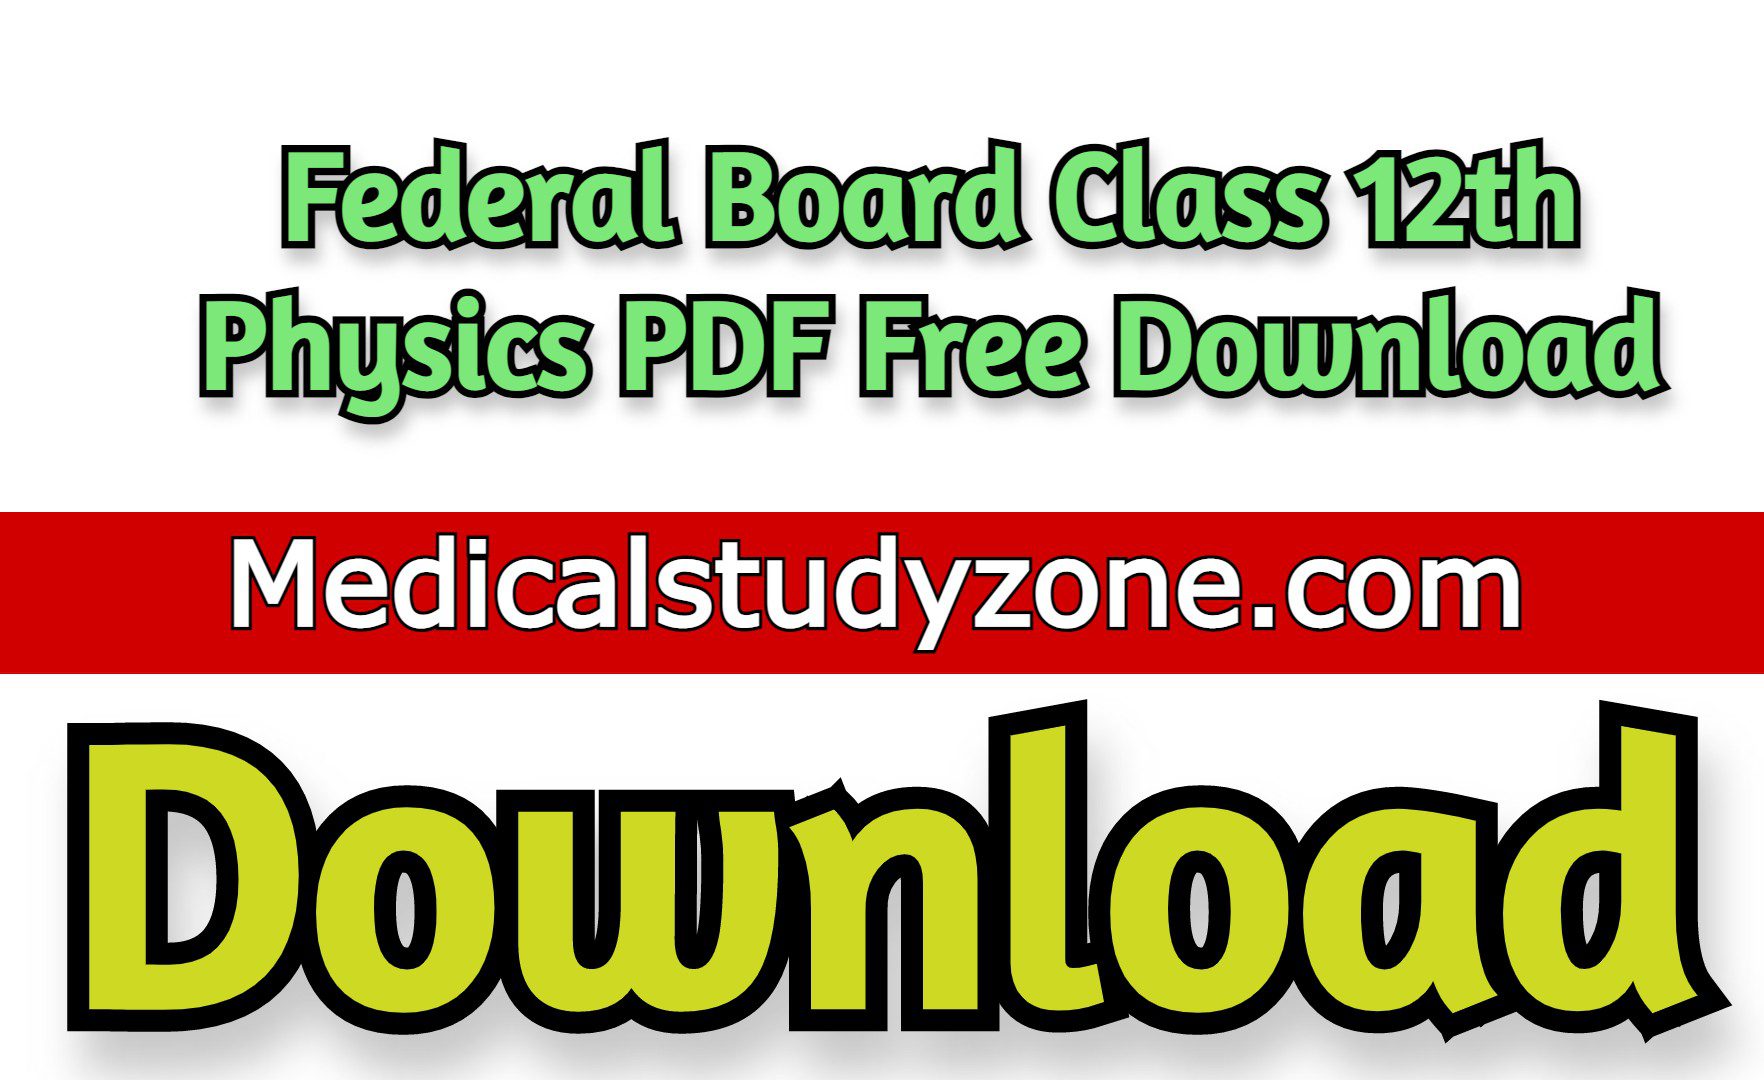 Federal Board Class 12th Physics PDF Free Download